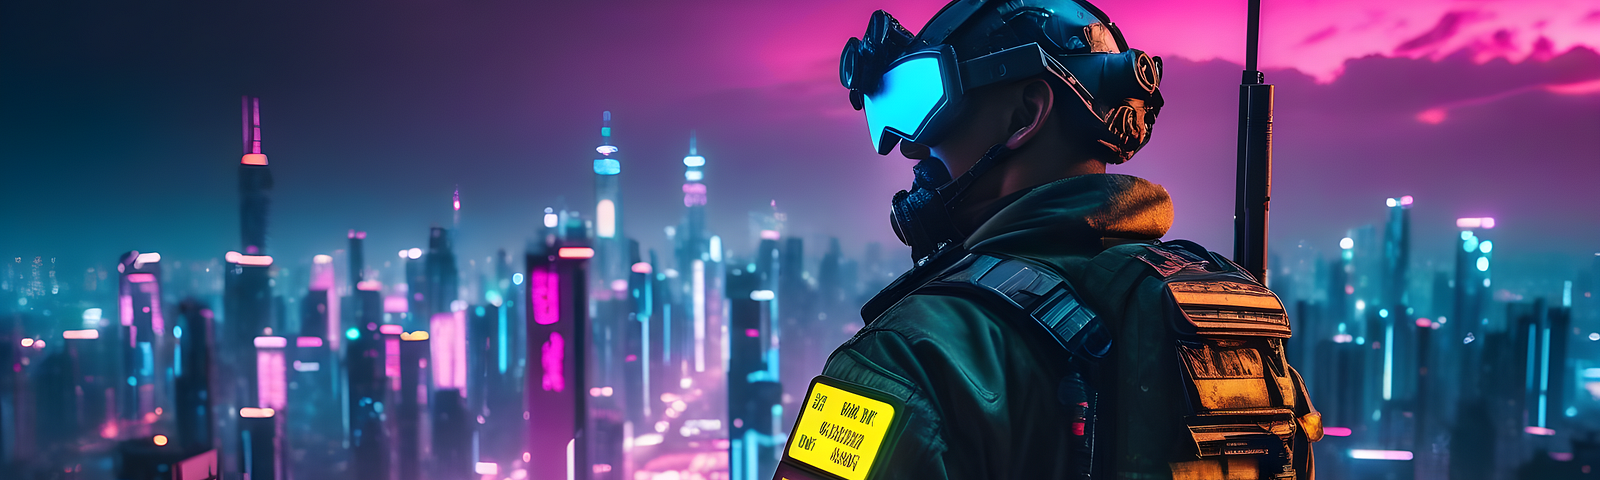 A military figure in front of a cyberpunk cityscape